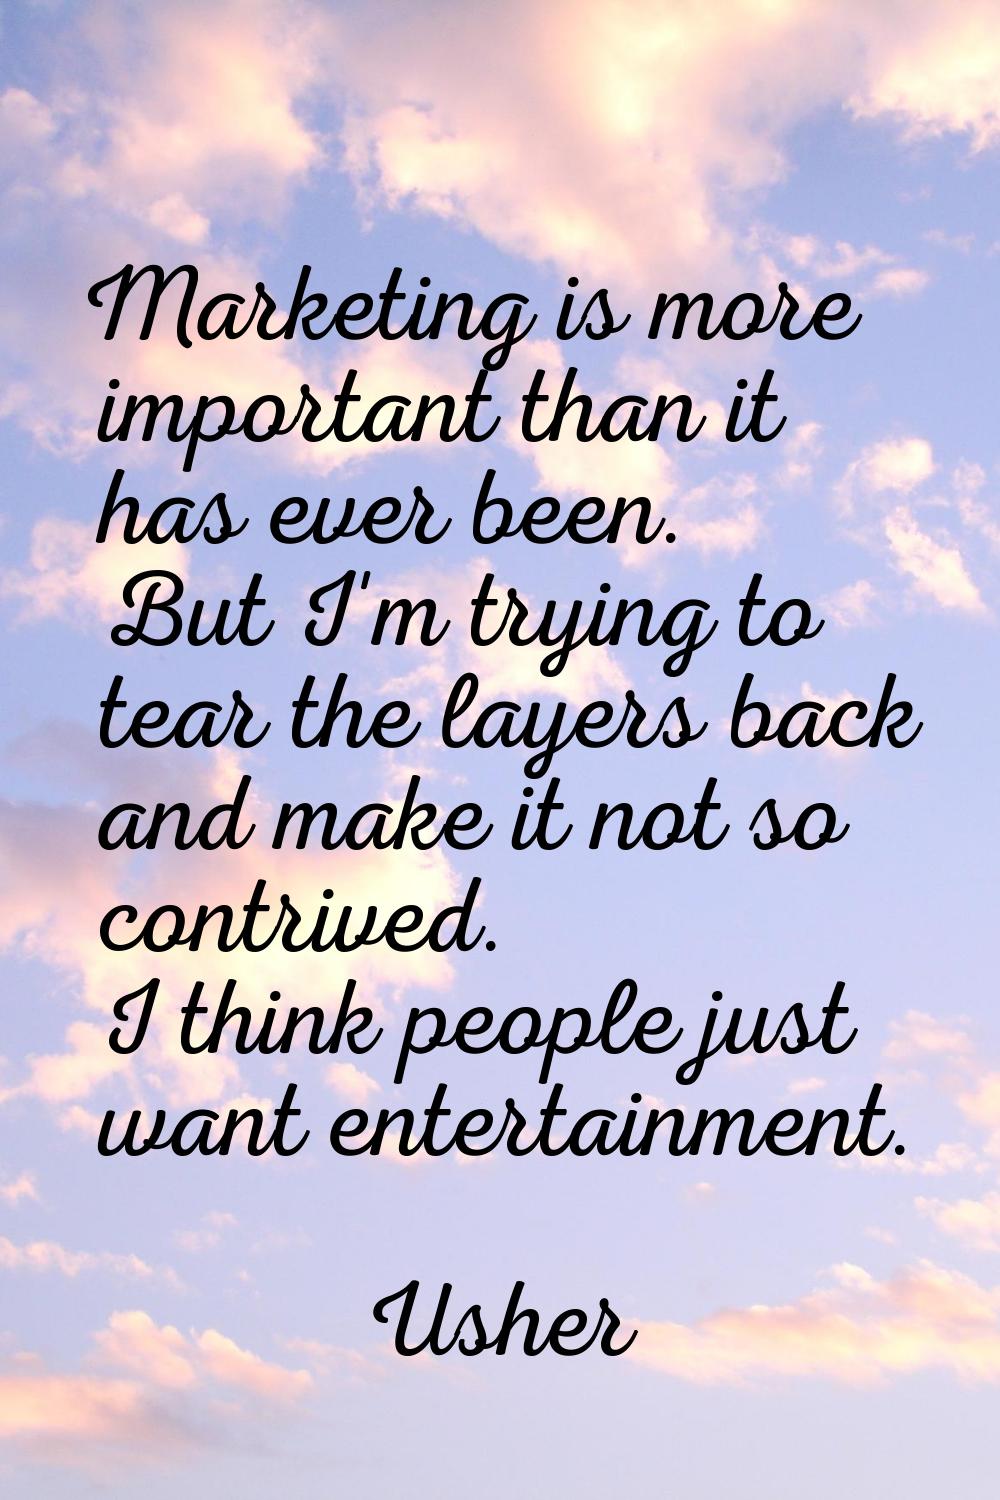 Marketing is more important than it has ever been. But I'm trying to tear the layers back and make 